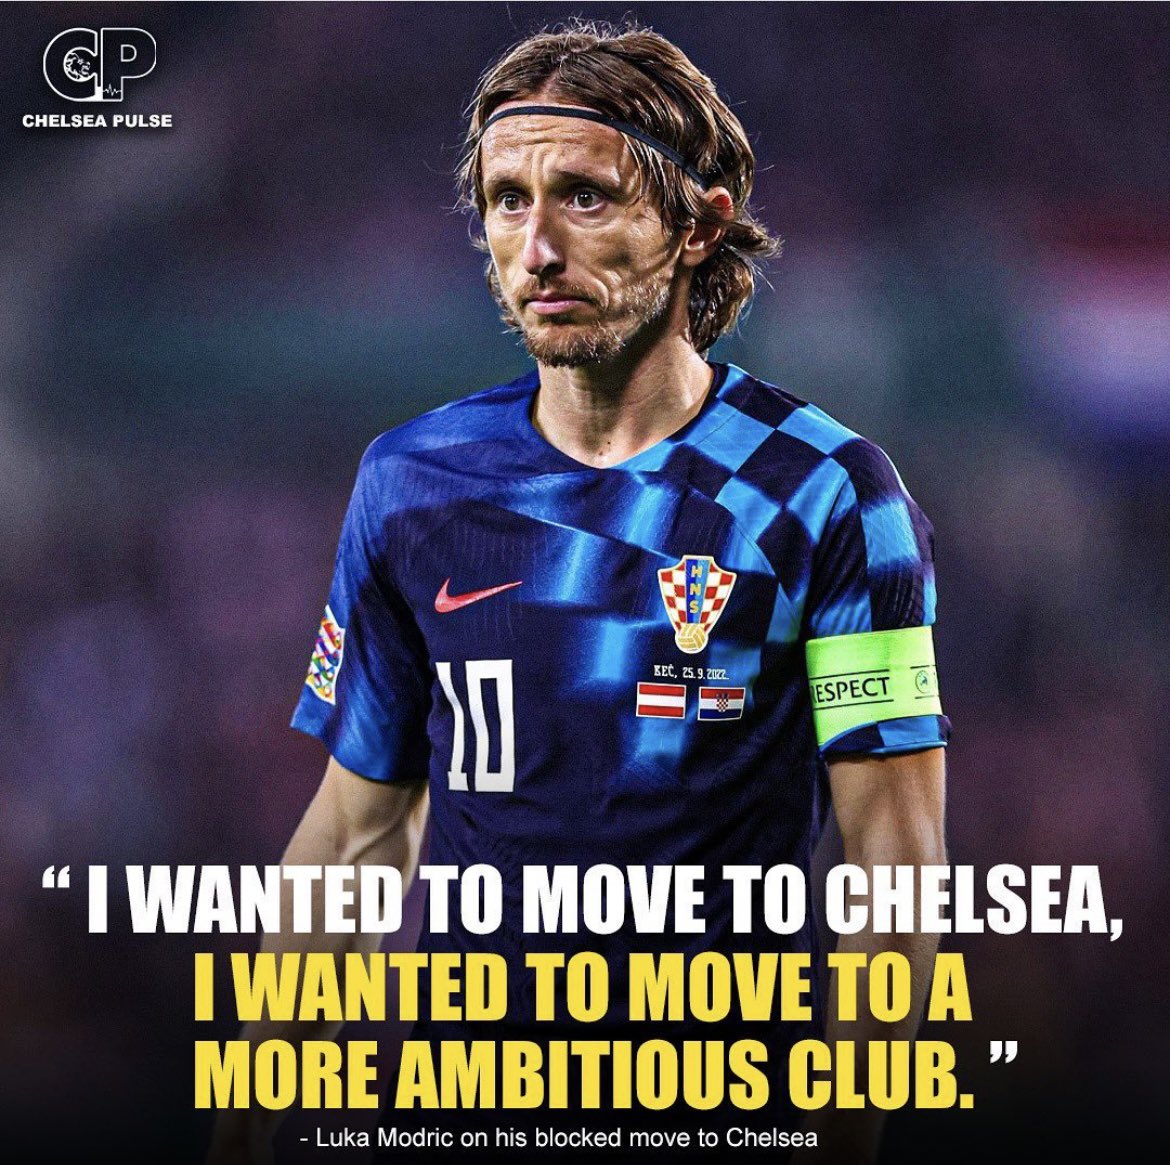 RT @FrankKhalidUK: Luka Modric wanted to move to Chelsea but Spurs didn’t allow it. https://t.co/jtS8Dp0Ak5